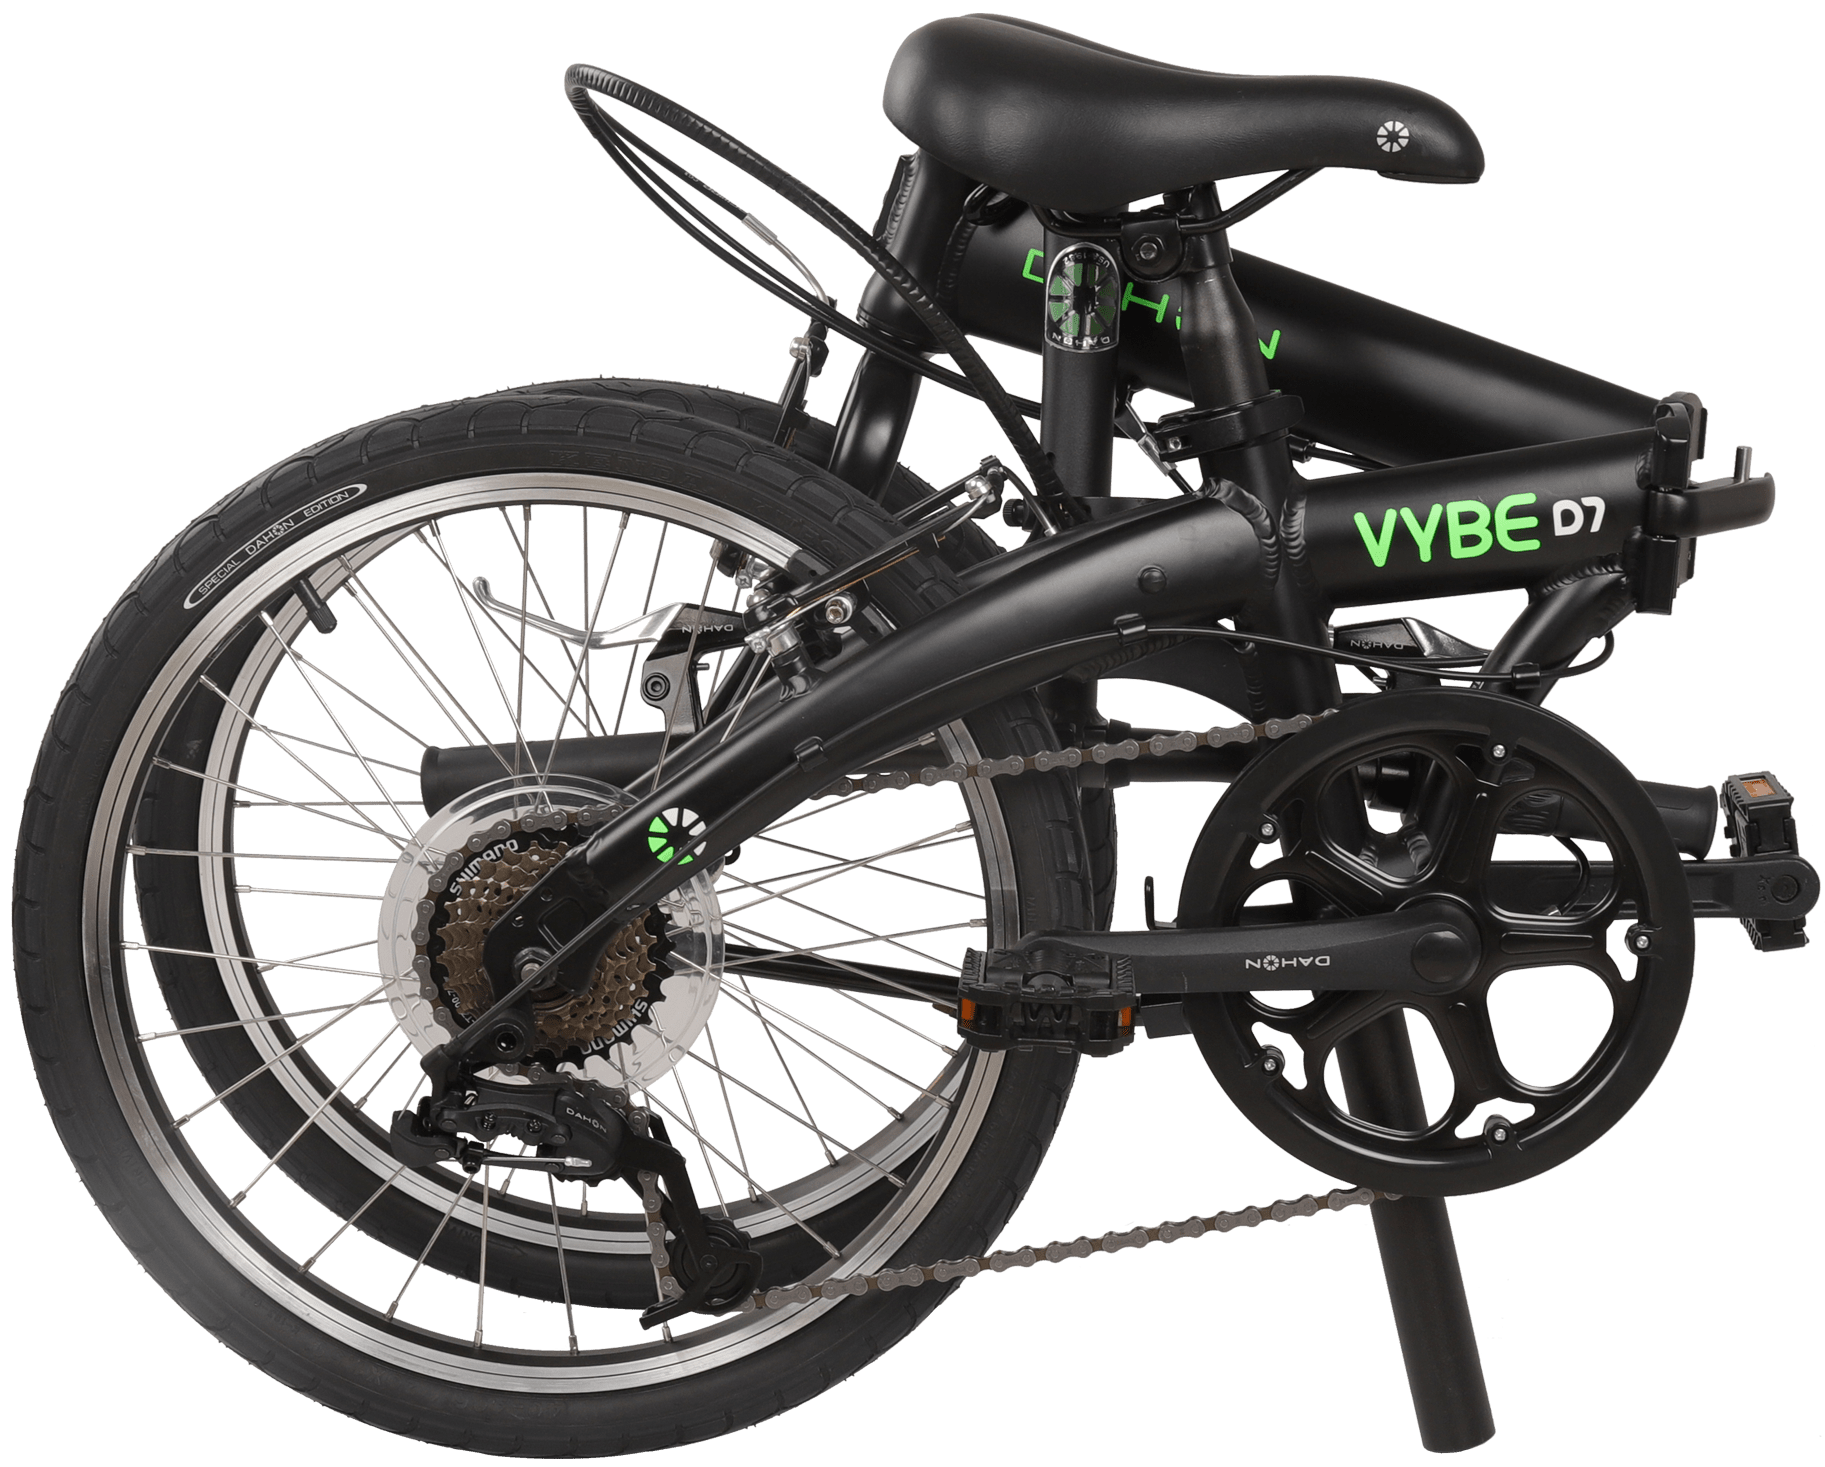 Legacy Geven Schrijfmachine Folding Bikes by DAHON | Vybe D7